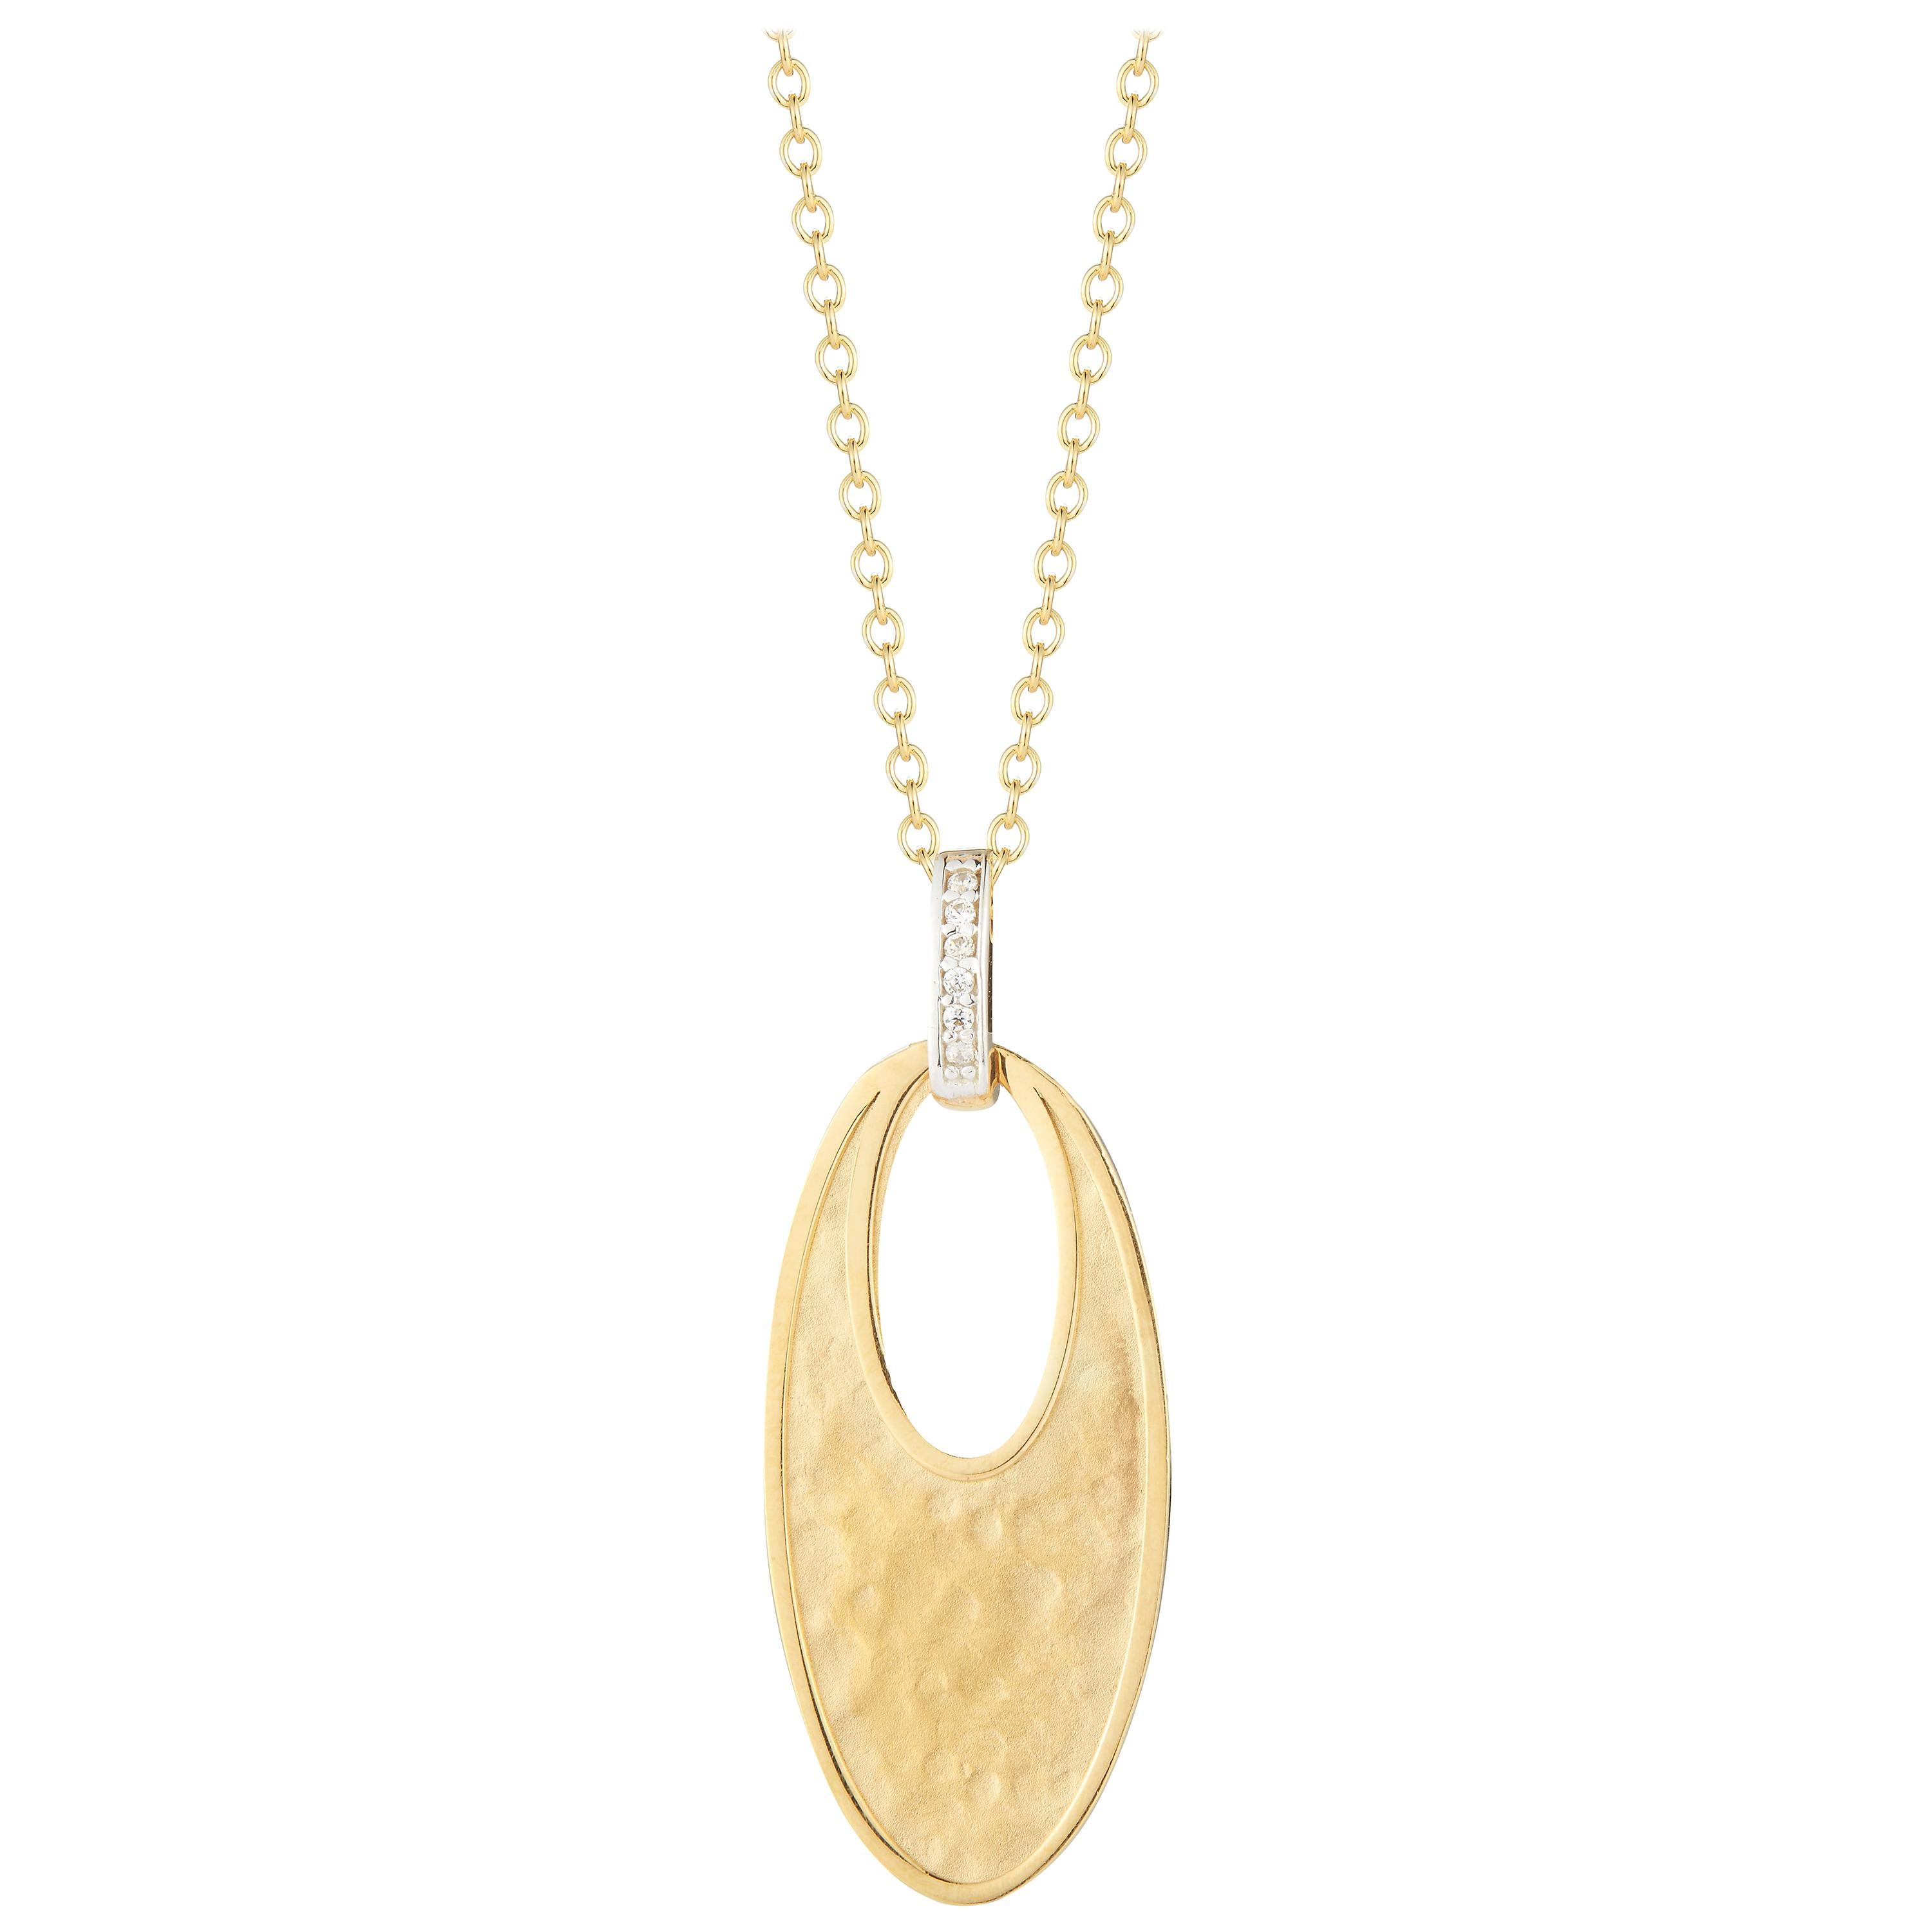 Handcraft 14 Karat Yellow Gold Matte, Hammer and Polish-Finished Oval Pendant For Sale